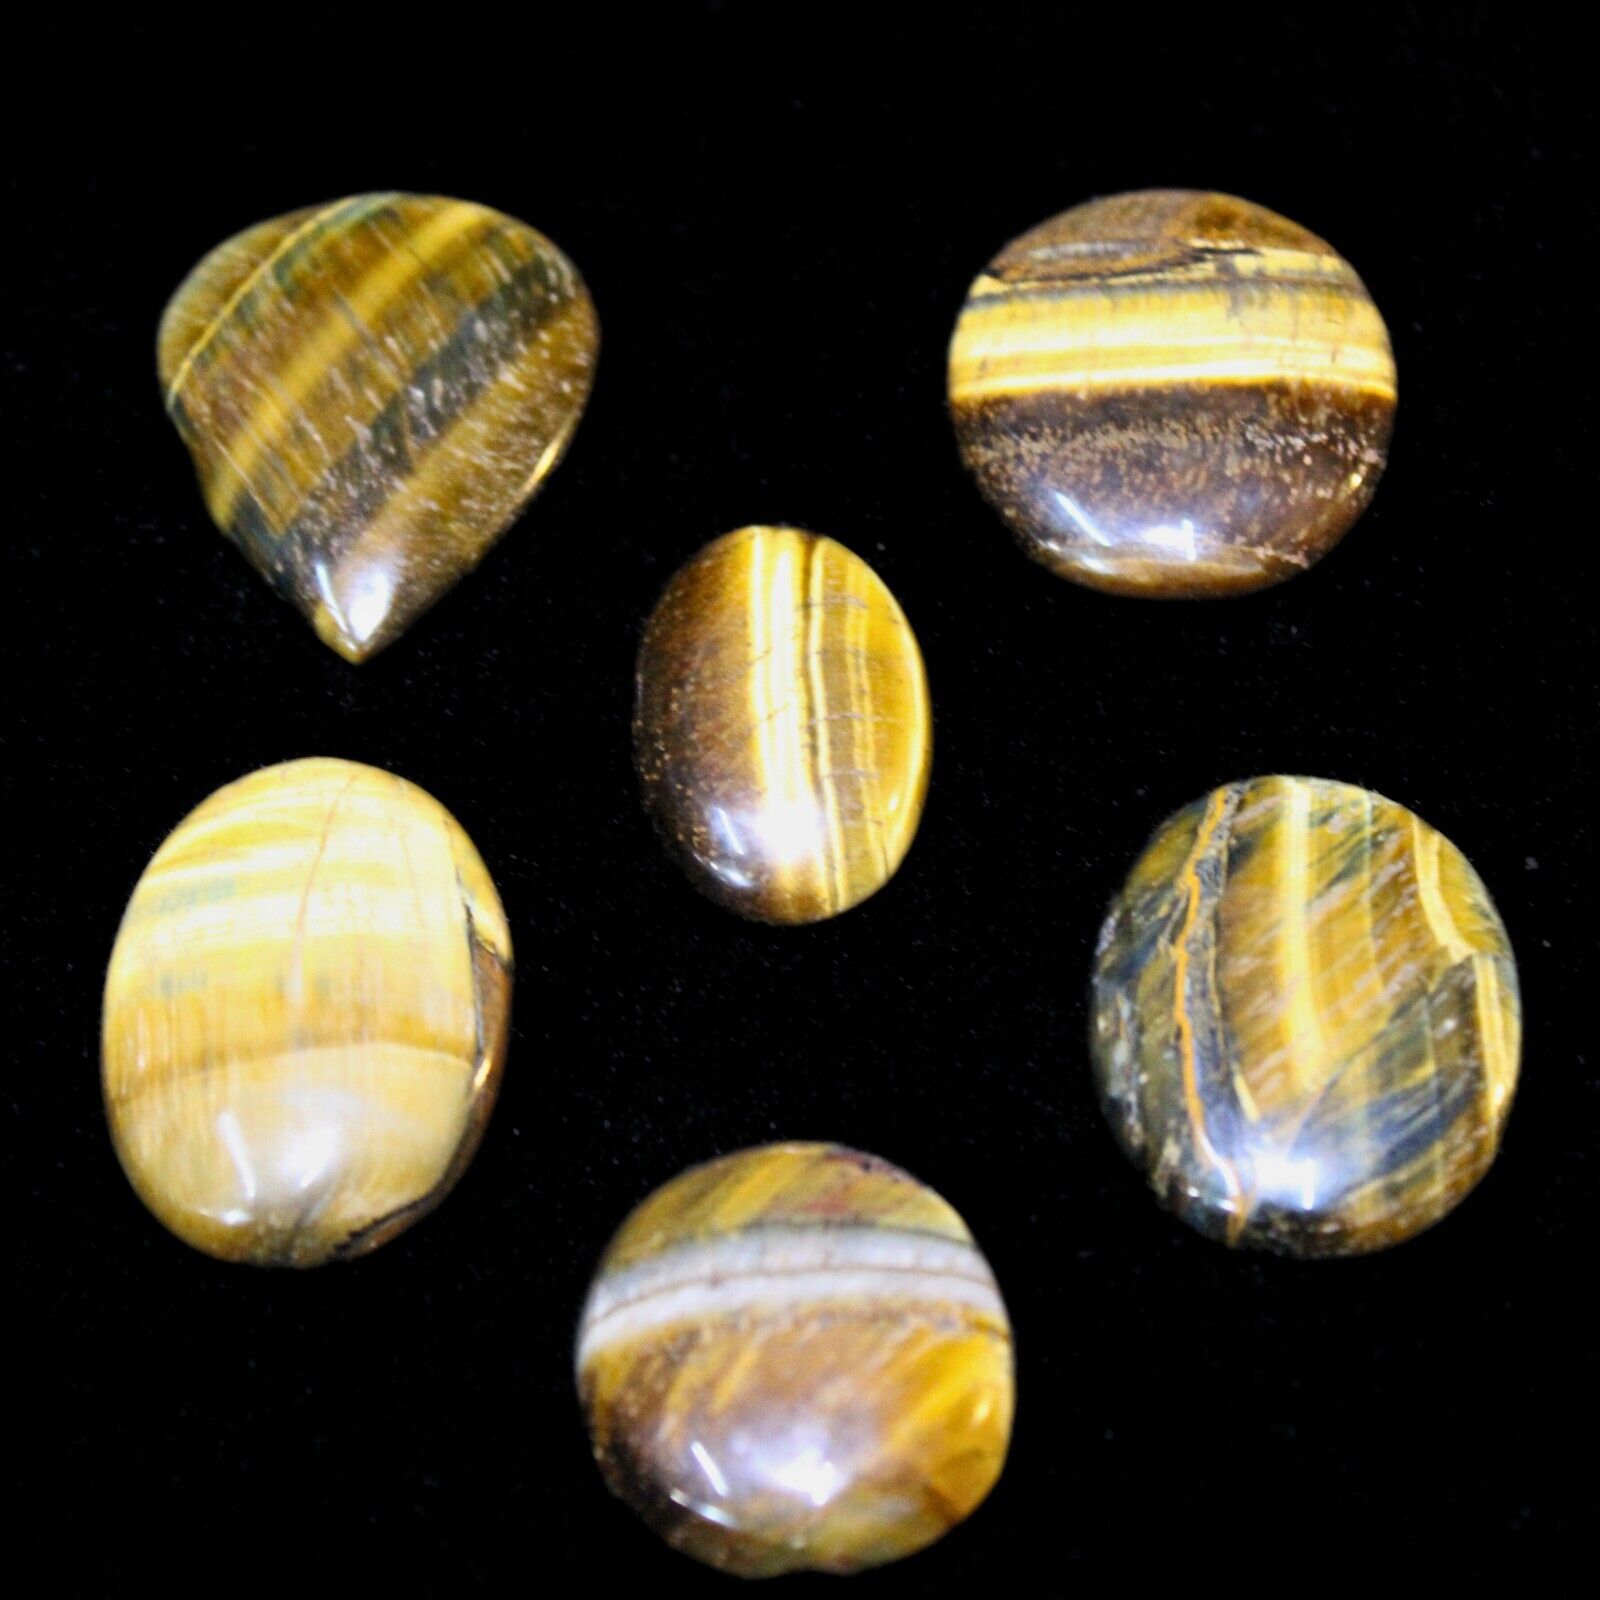 Introducing the 90g Polished Tiger Eye Cabochon 6 Piece Combo Pack from Crystals